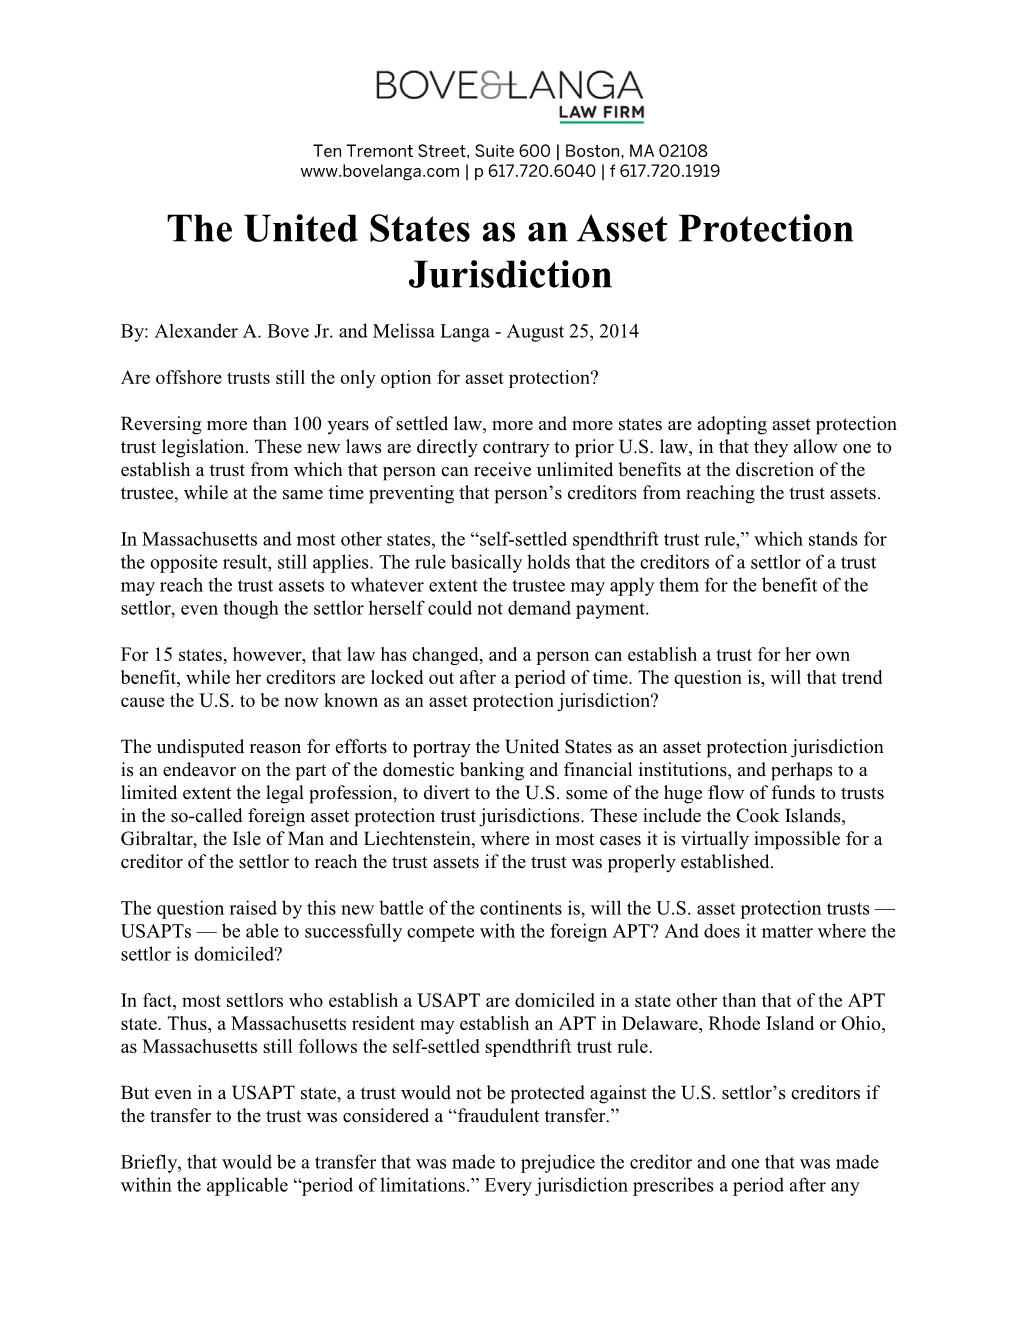 Special Feature-The United States As an Asset Protection Jurisdiction